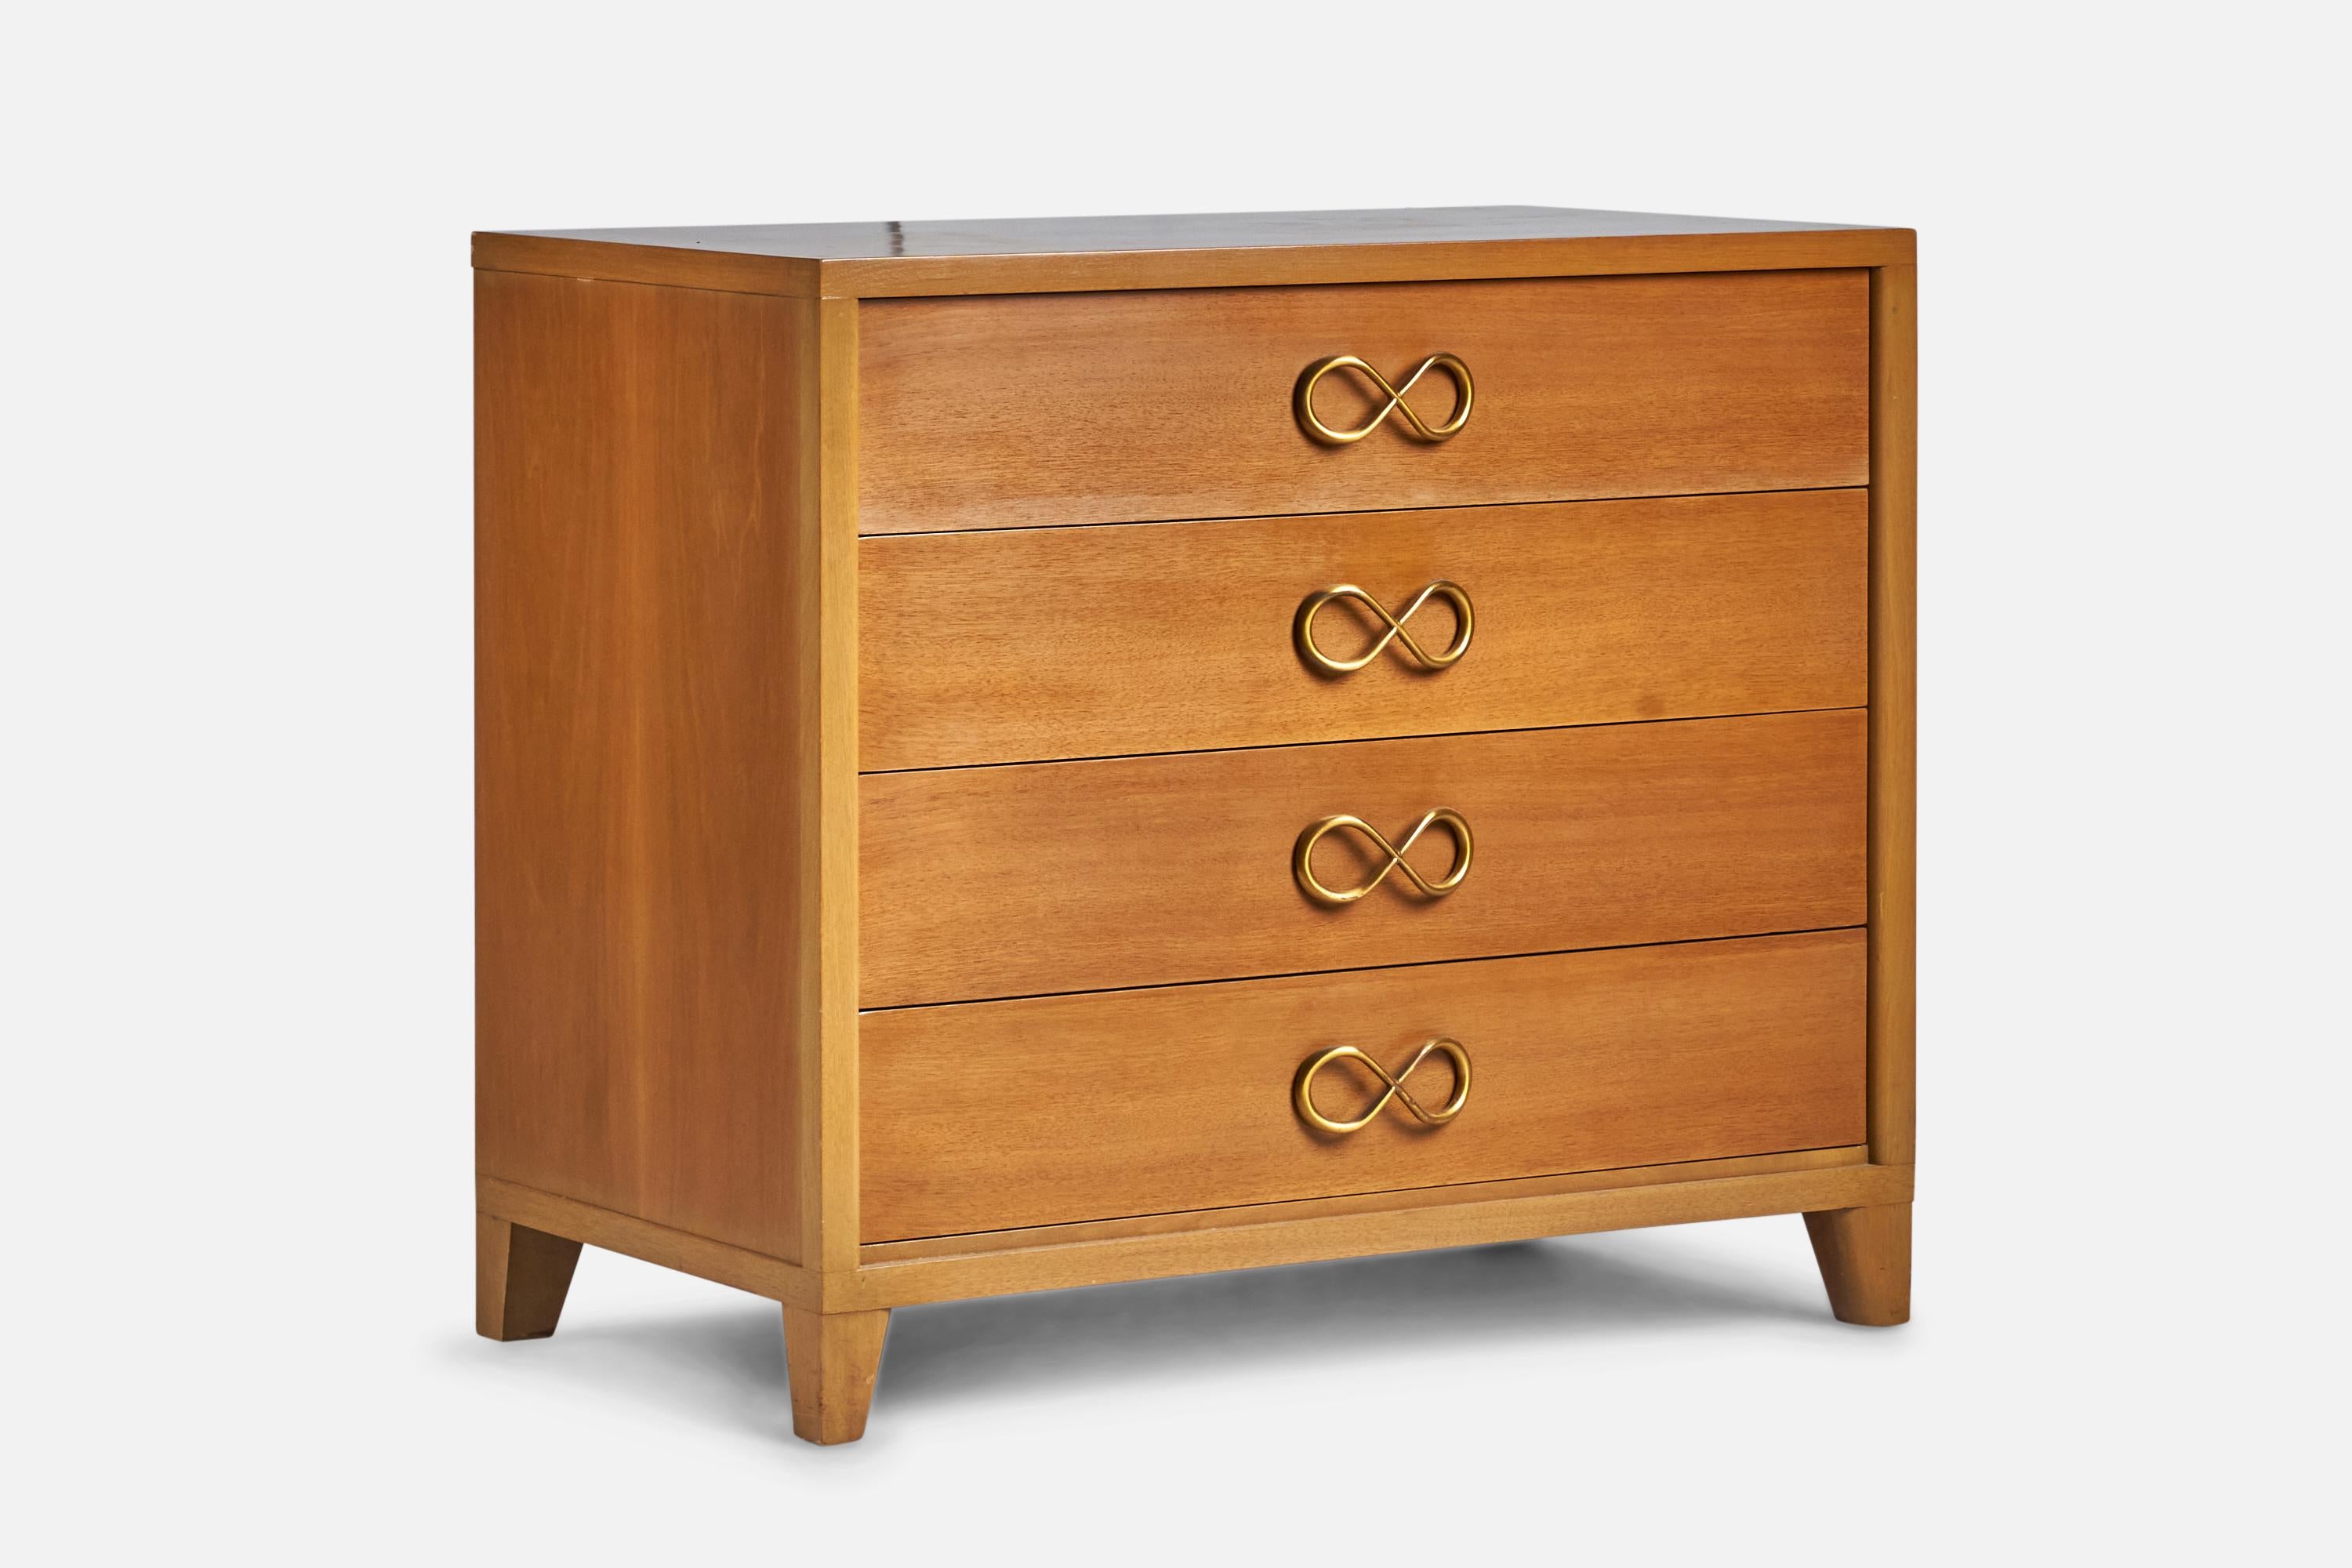 A brass and walnut chest of drawers designed and produced by Red Lion Furniture, USA, 1940s.